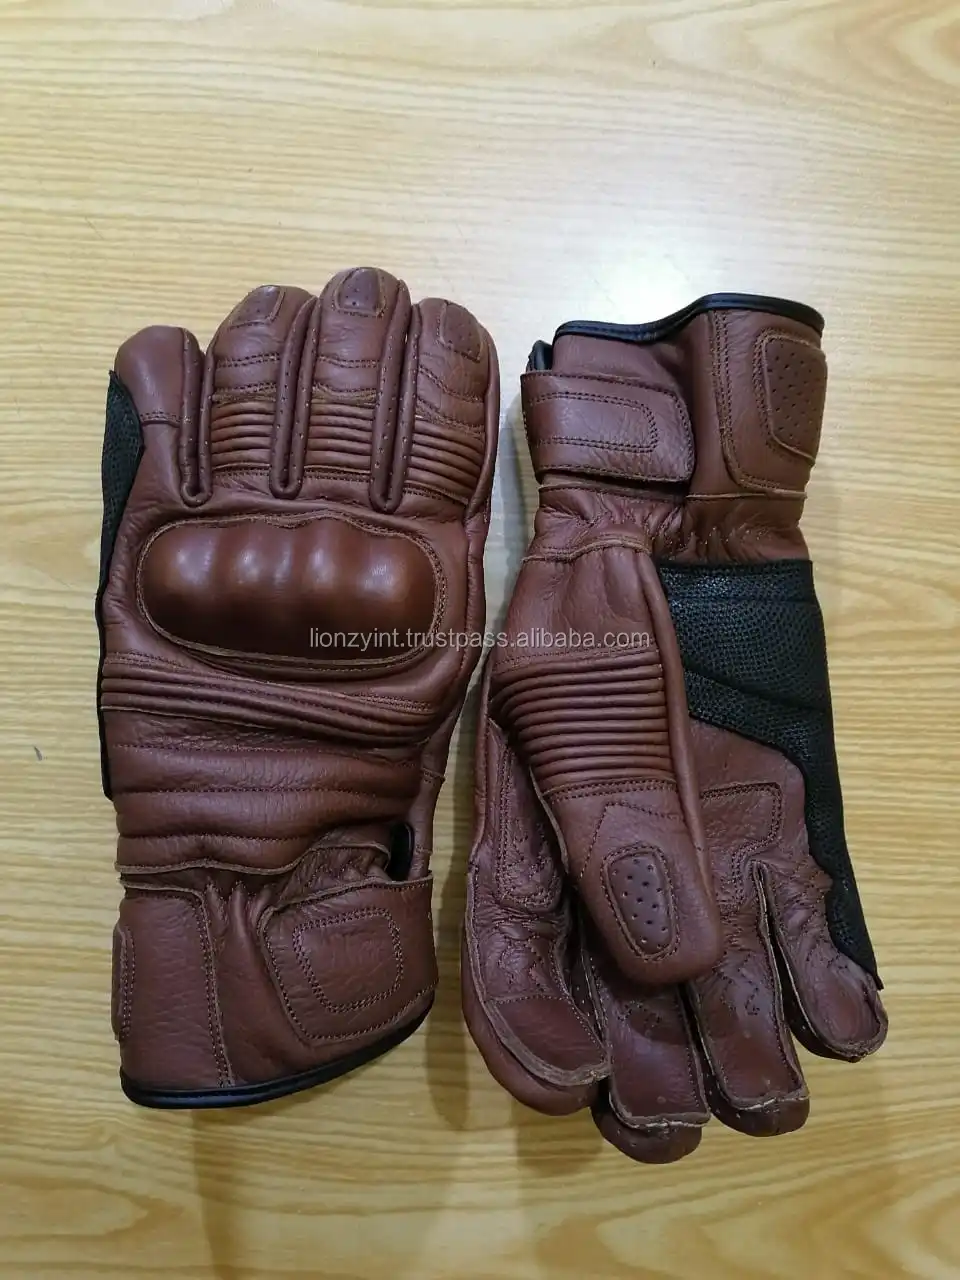 Oxford Holton Short Classic Motorcycle Motorbike Leather Gloves Brown 